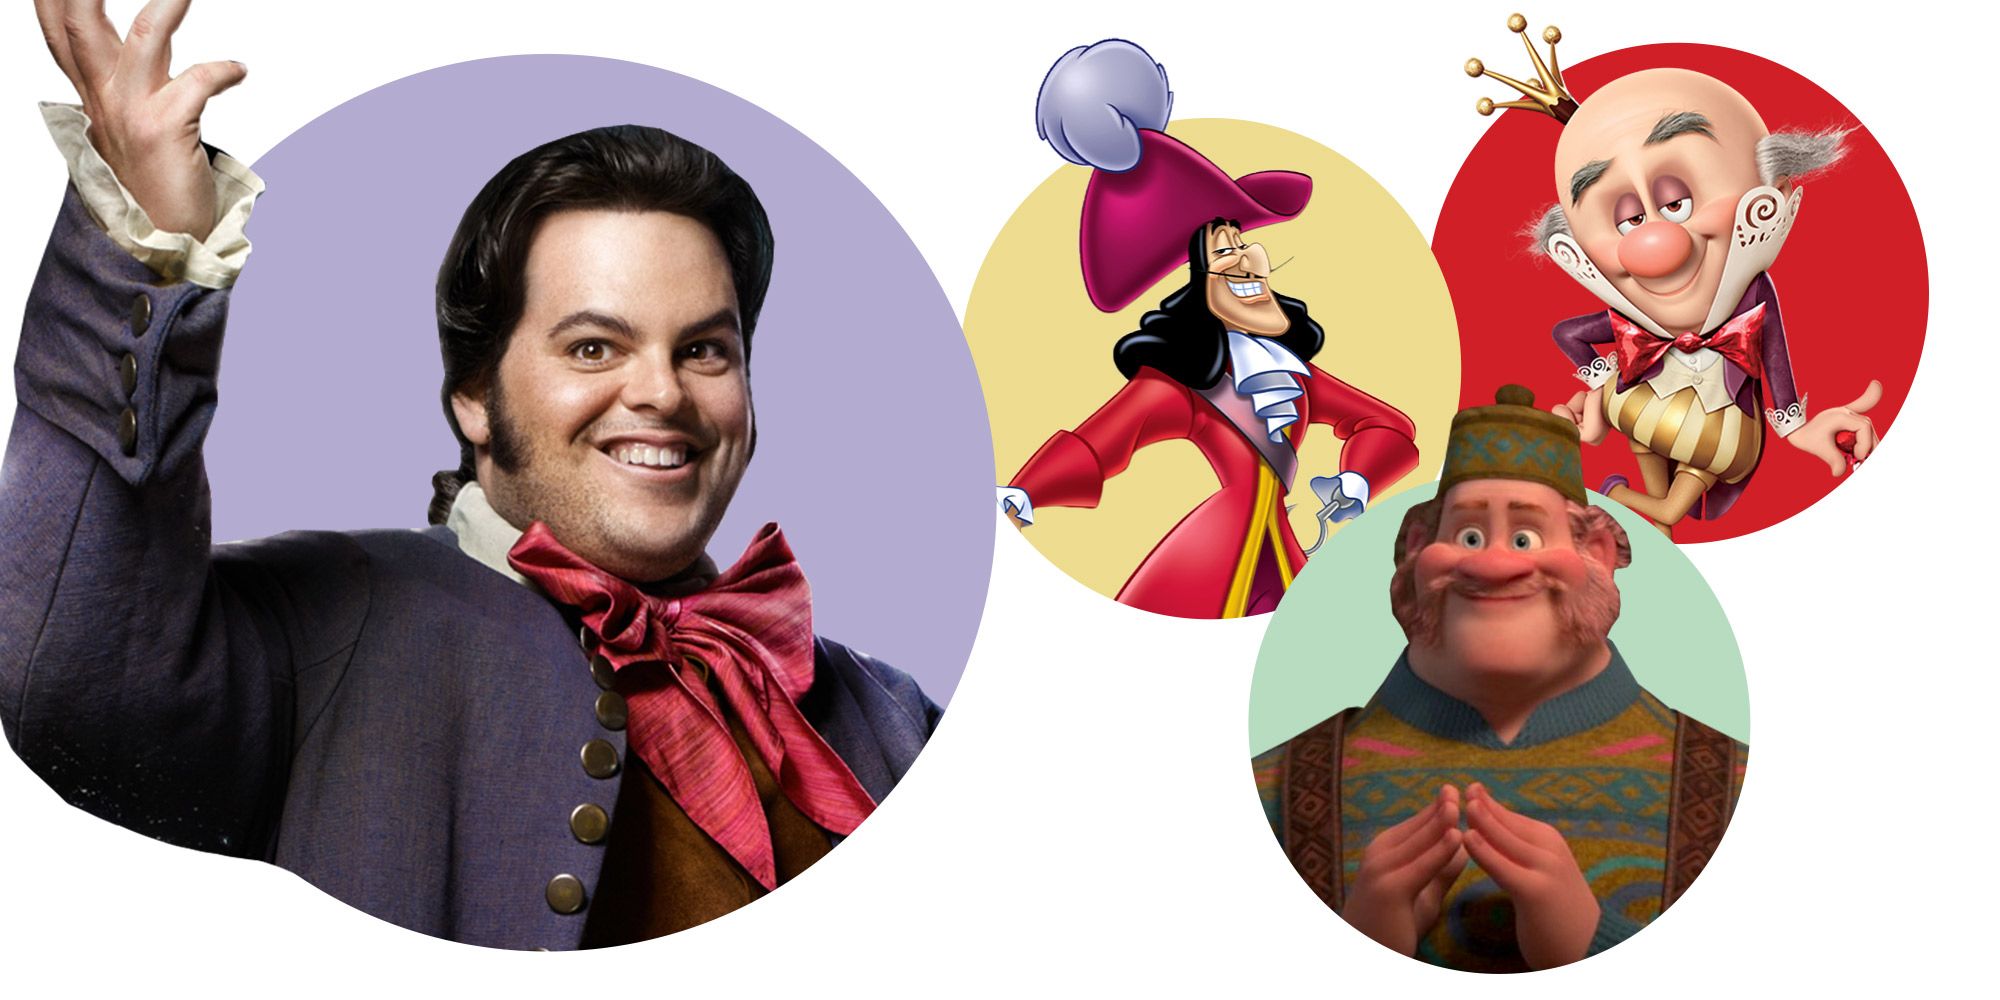 Disney Movies With Queer Characters - Disney's History With Gay and LGBT  Themes